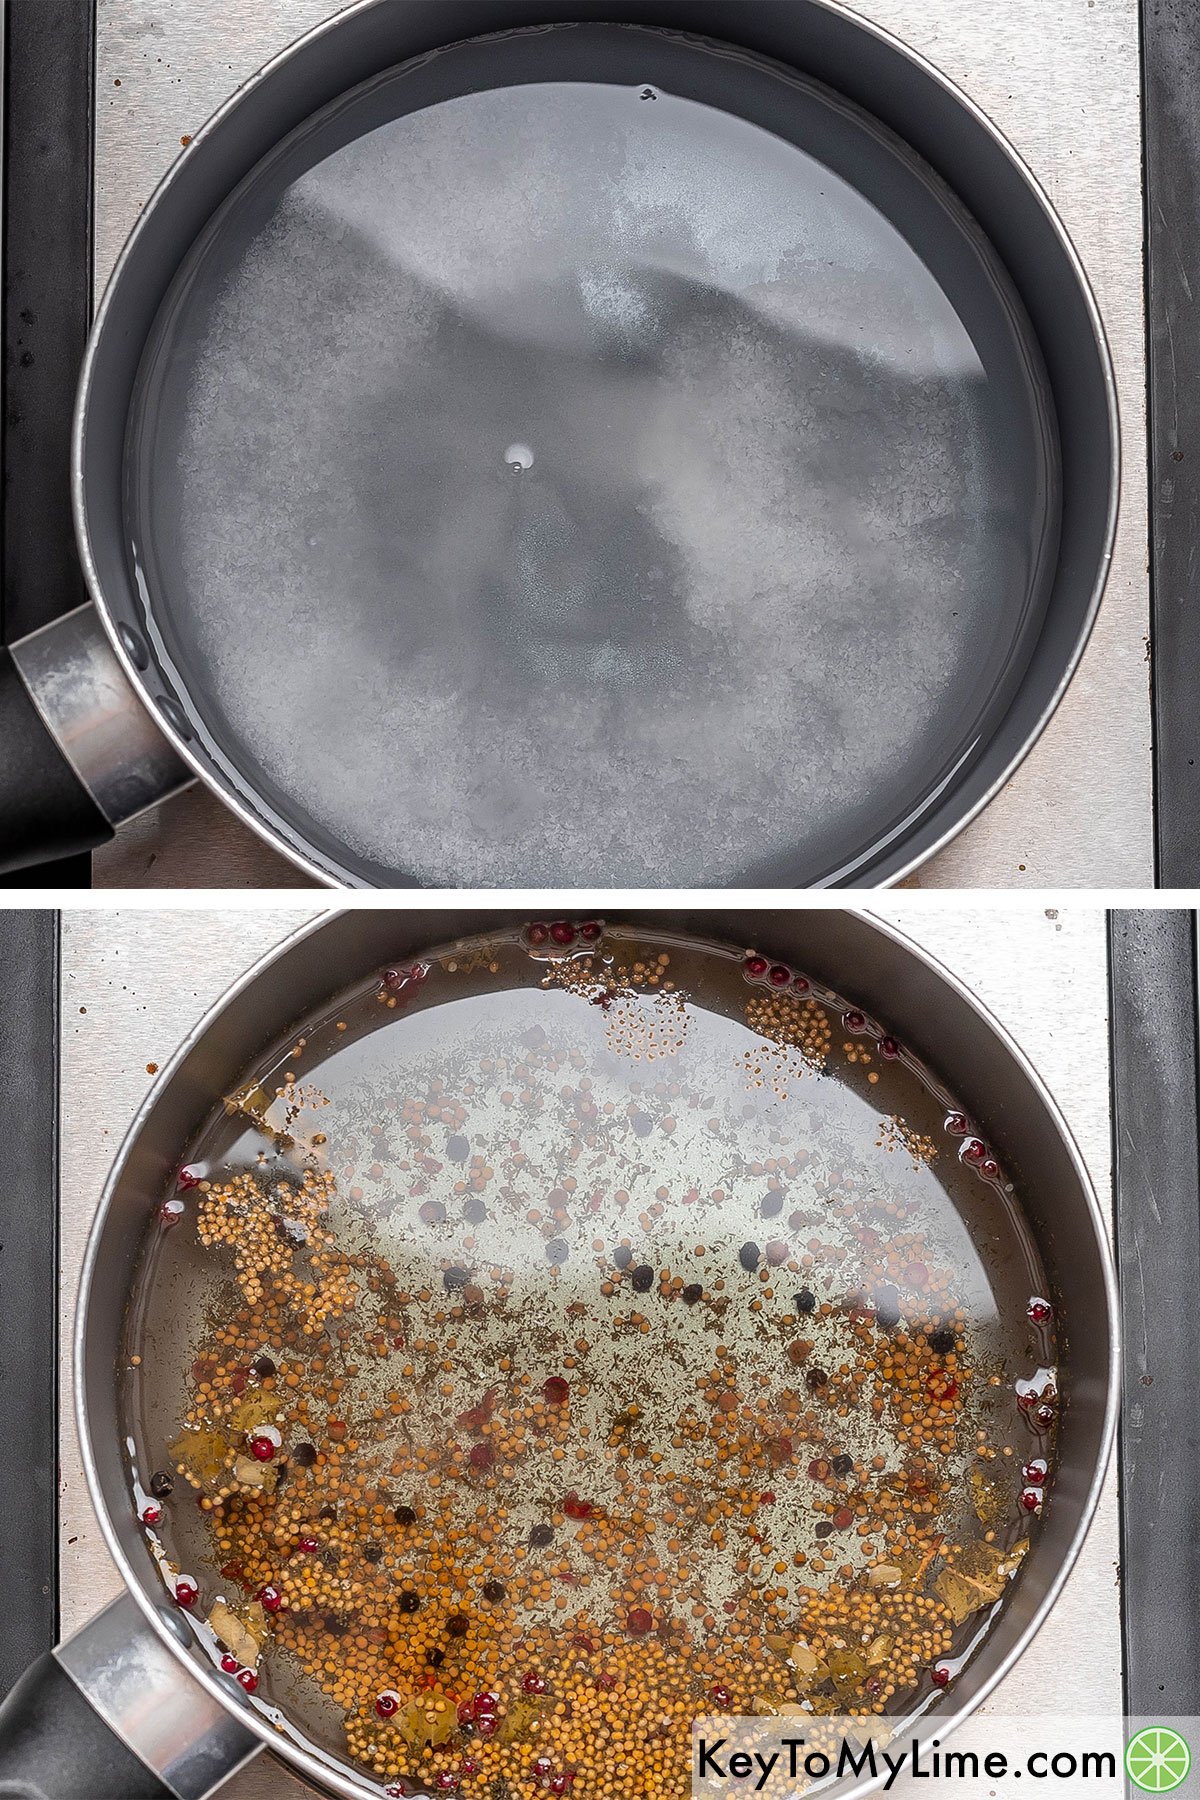 Dissolving sugar and salt in a heated sauce pan with vinegar, water then adding the peppercorn mixture.